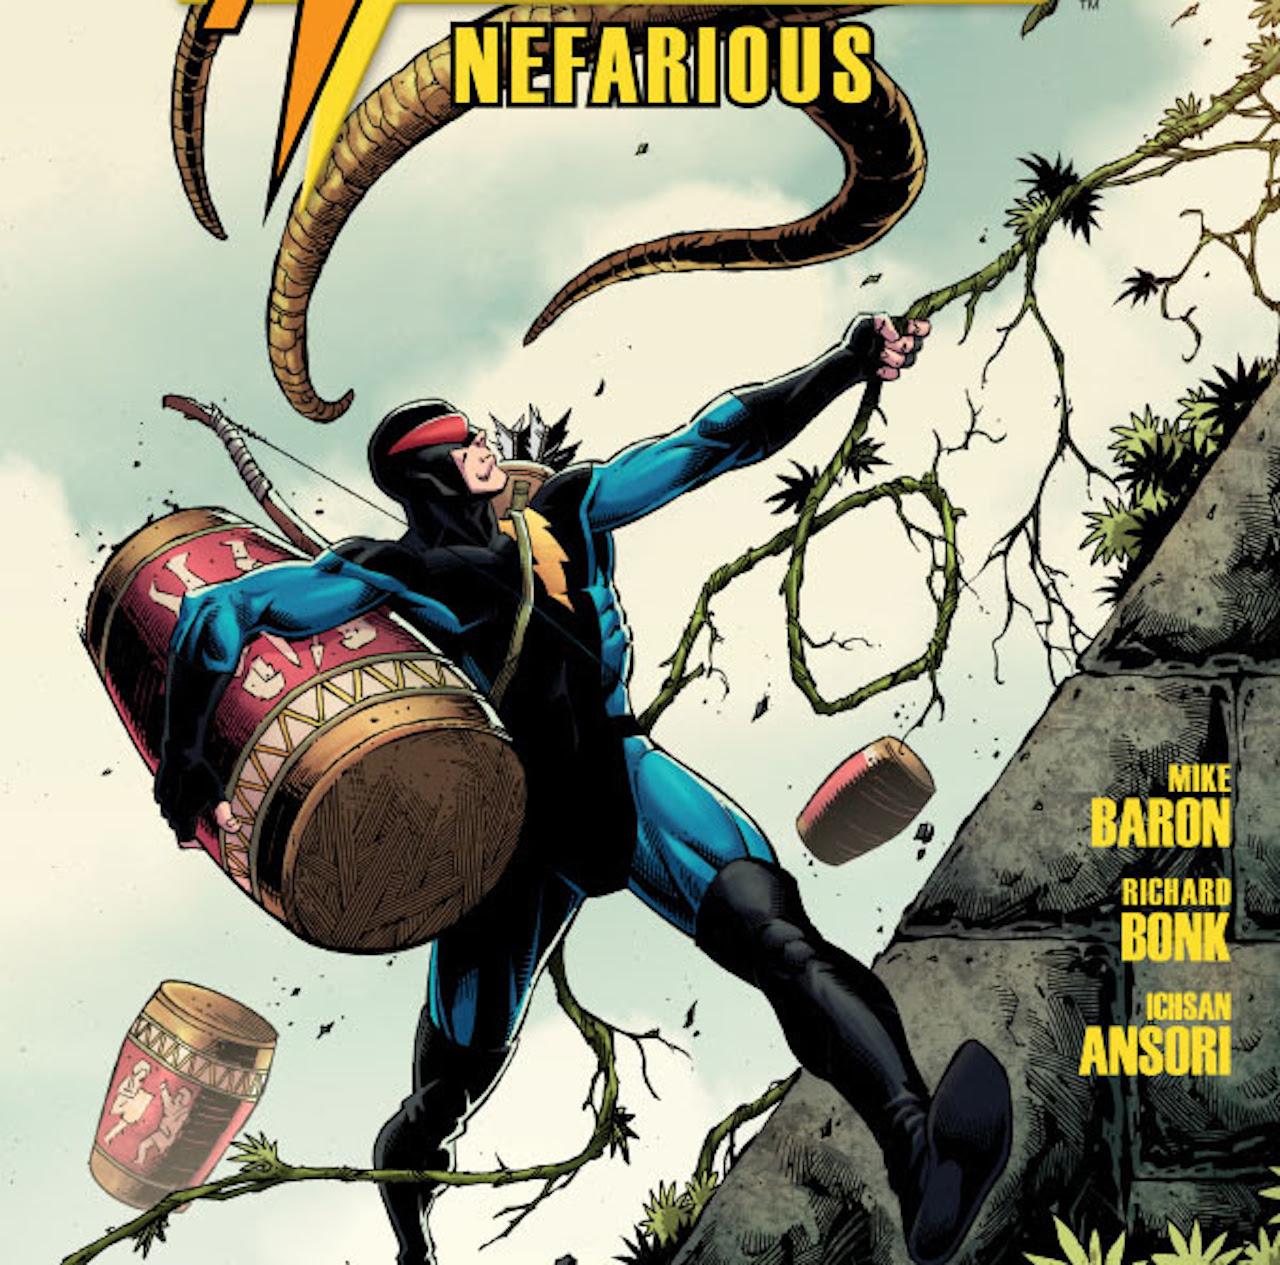 'Nexus: Nefarious' set to launch next chapter in Mike Baron's series in 2023